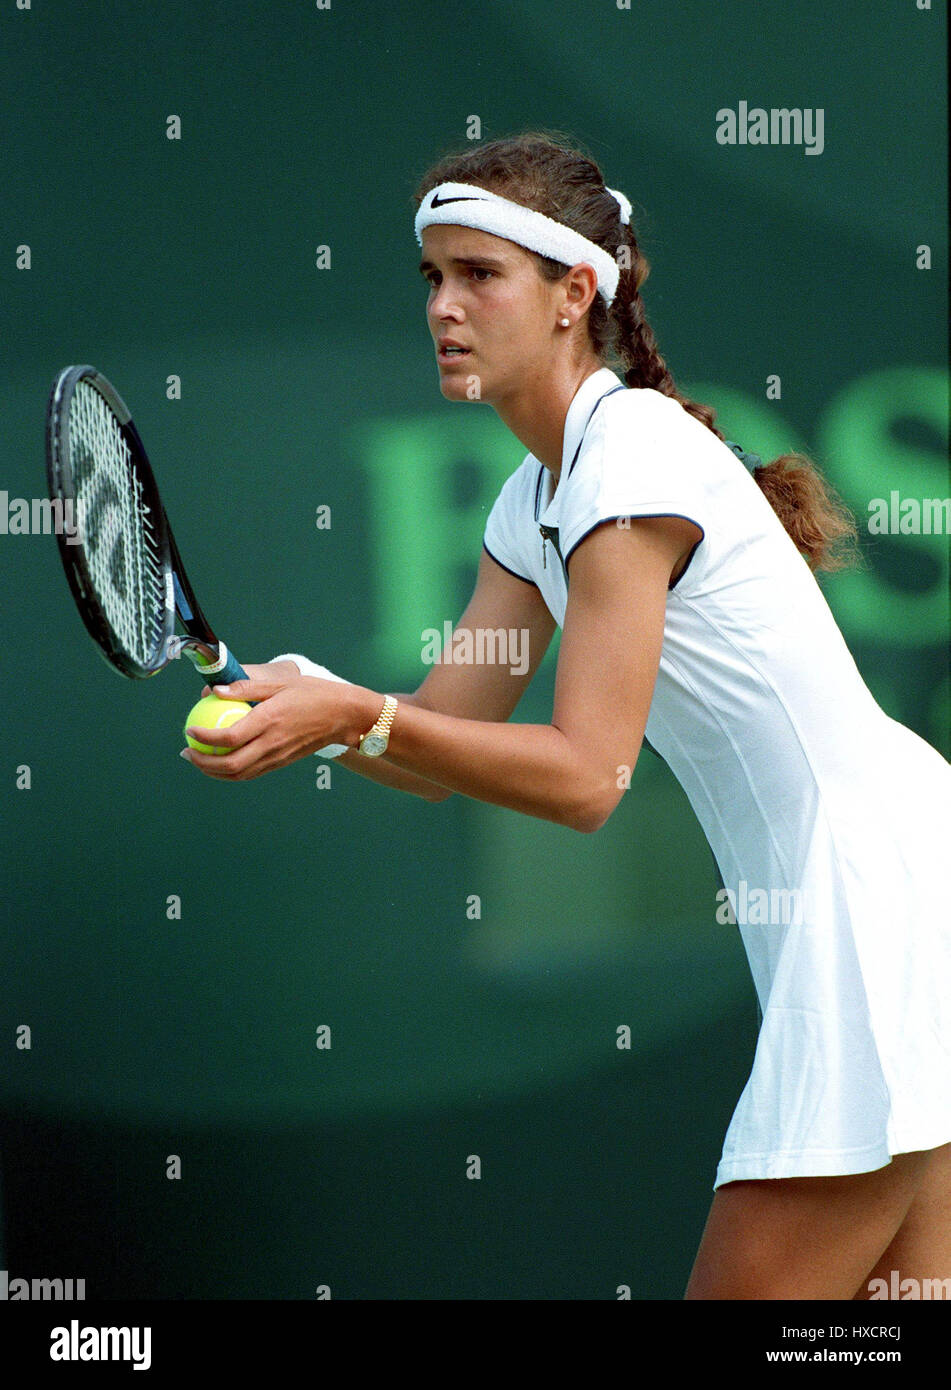 Mary Joe Fernandez High Resolution Stock Photography and Images - Alamy